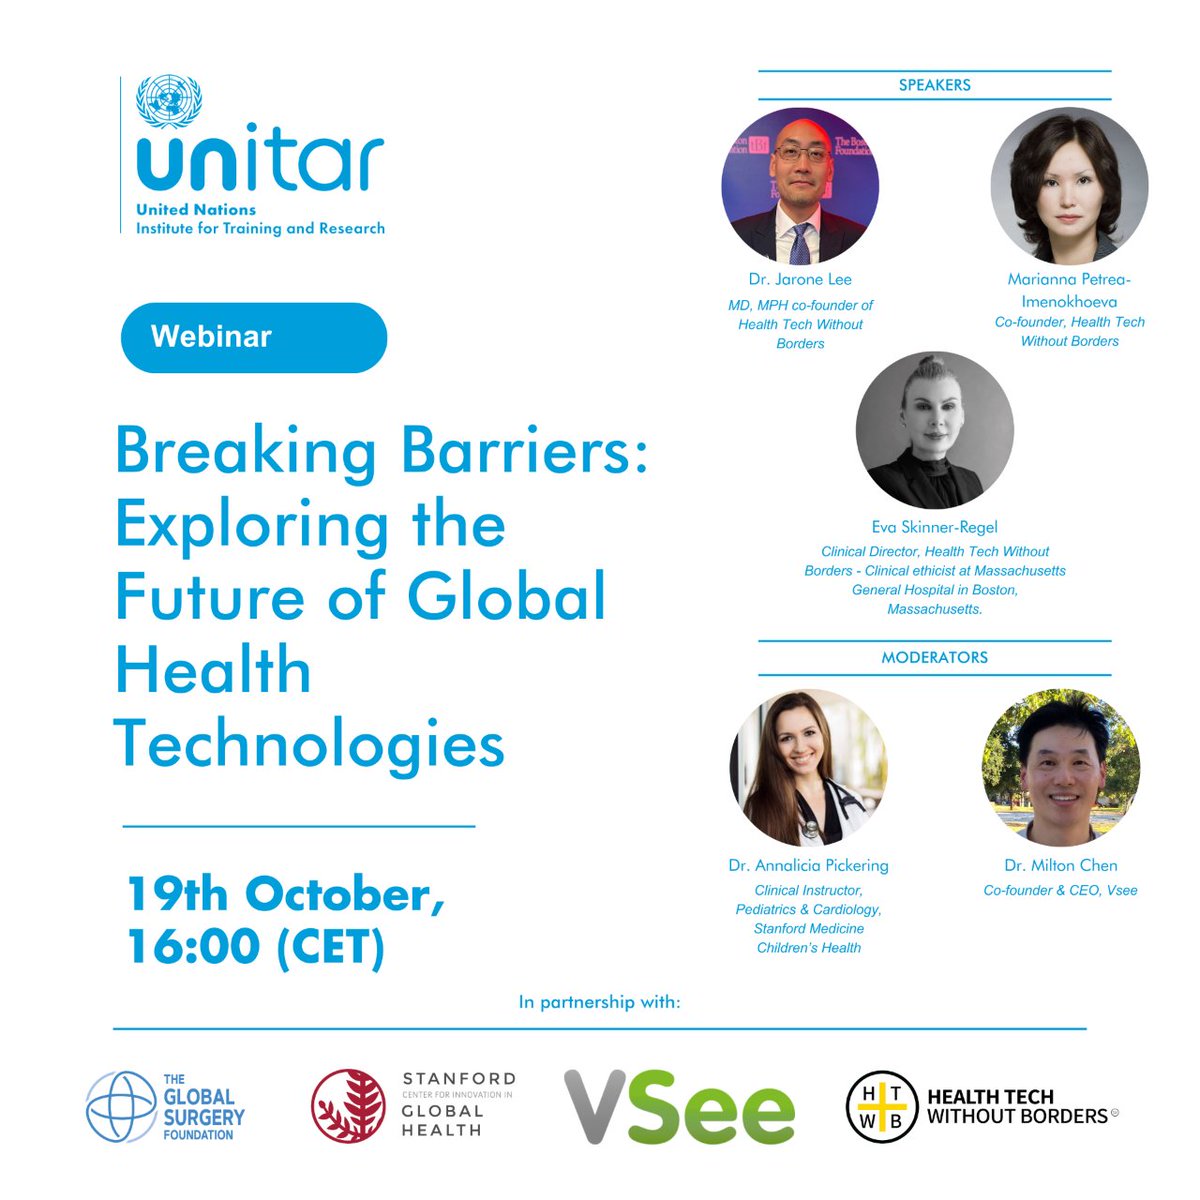 🌐 2 days to our new webinar series on a collaboration with @GSF, @stanfordcigh, @VSee, and @HealthTechWB. Join us to explore the future of global health technologies and their impact on universal healthcare access.  More here: unitar.org/sustainable-de…  #BreakingBarriers